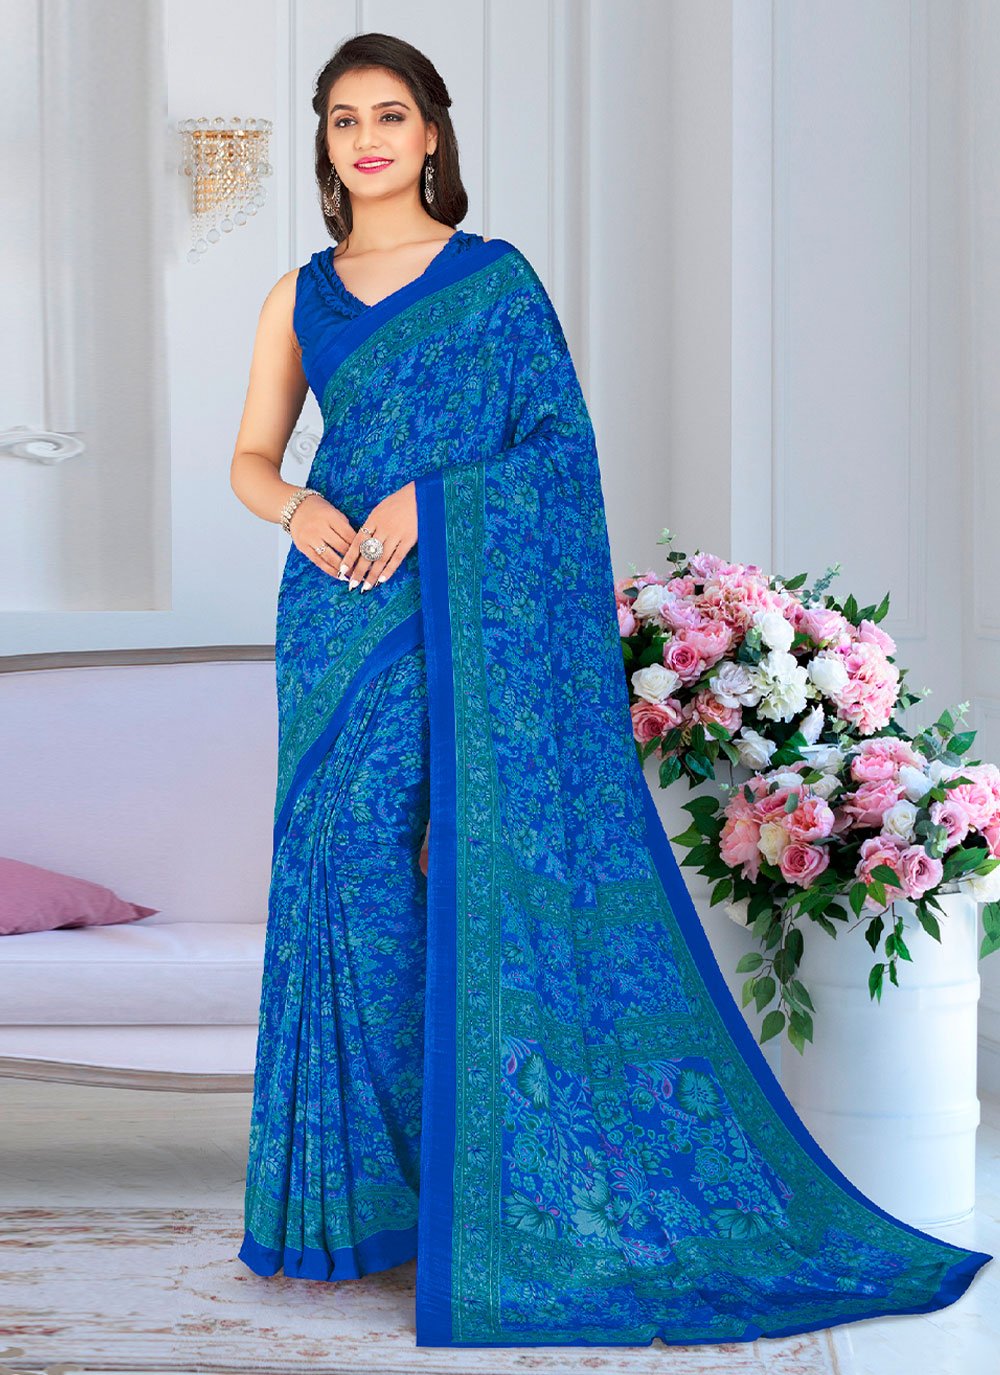 Faux Chiffon Designer Saree in Blue Enhanced with Printed